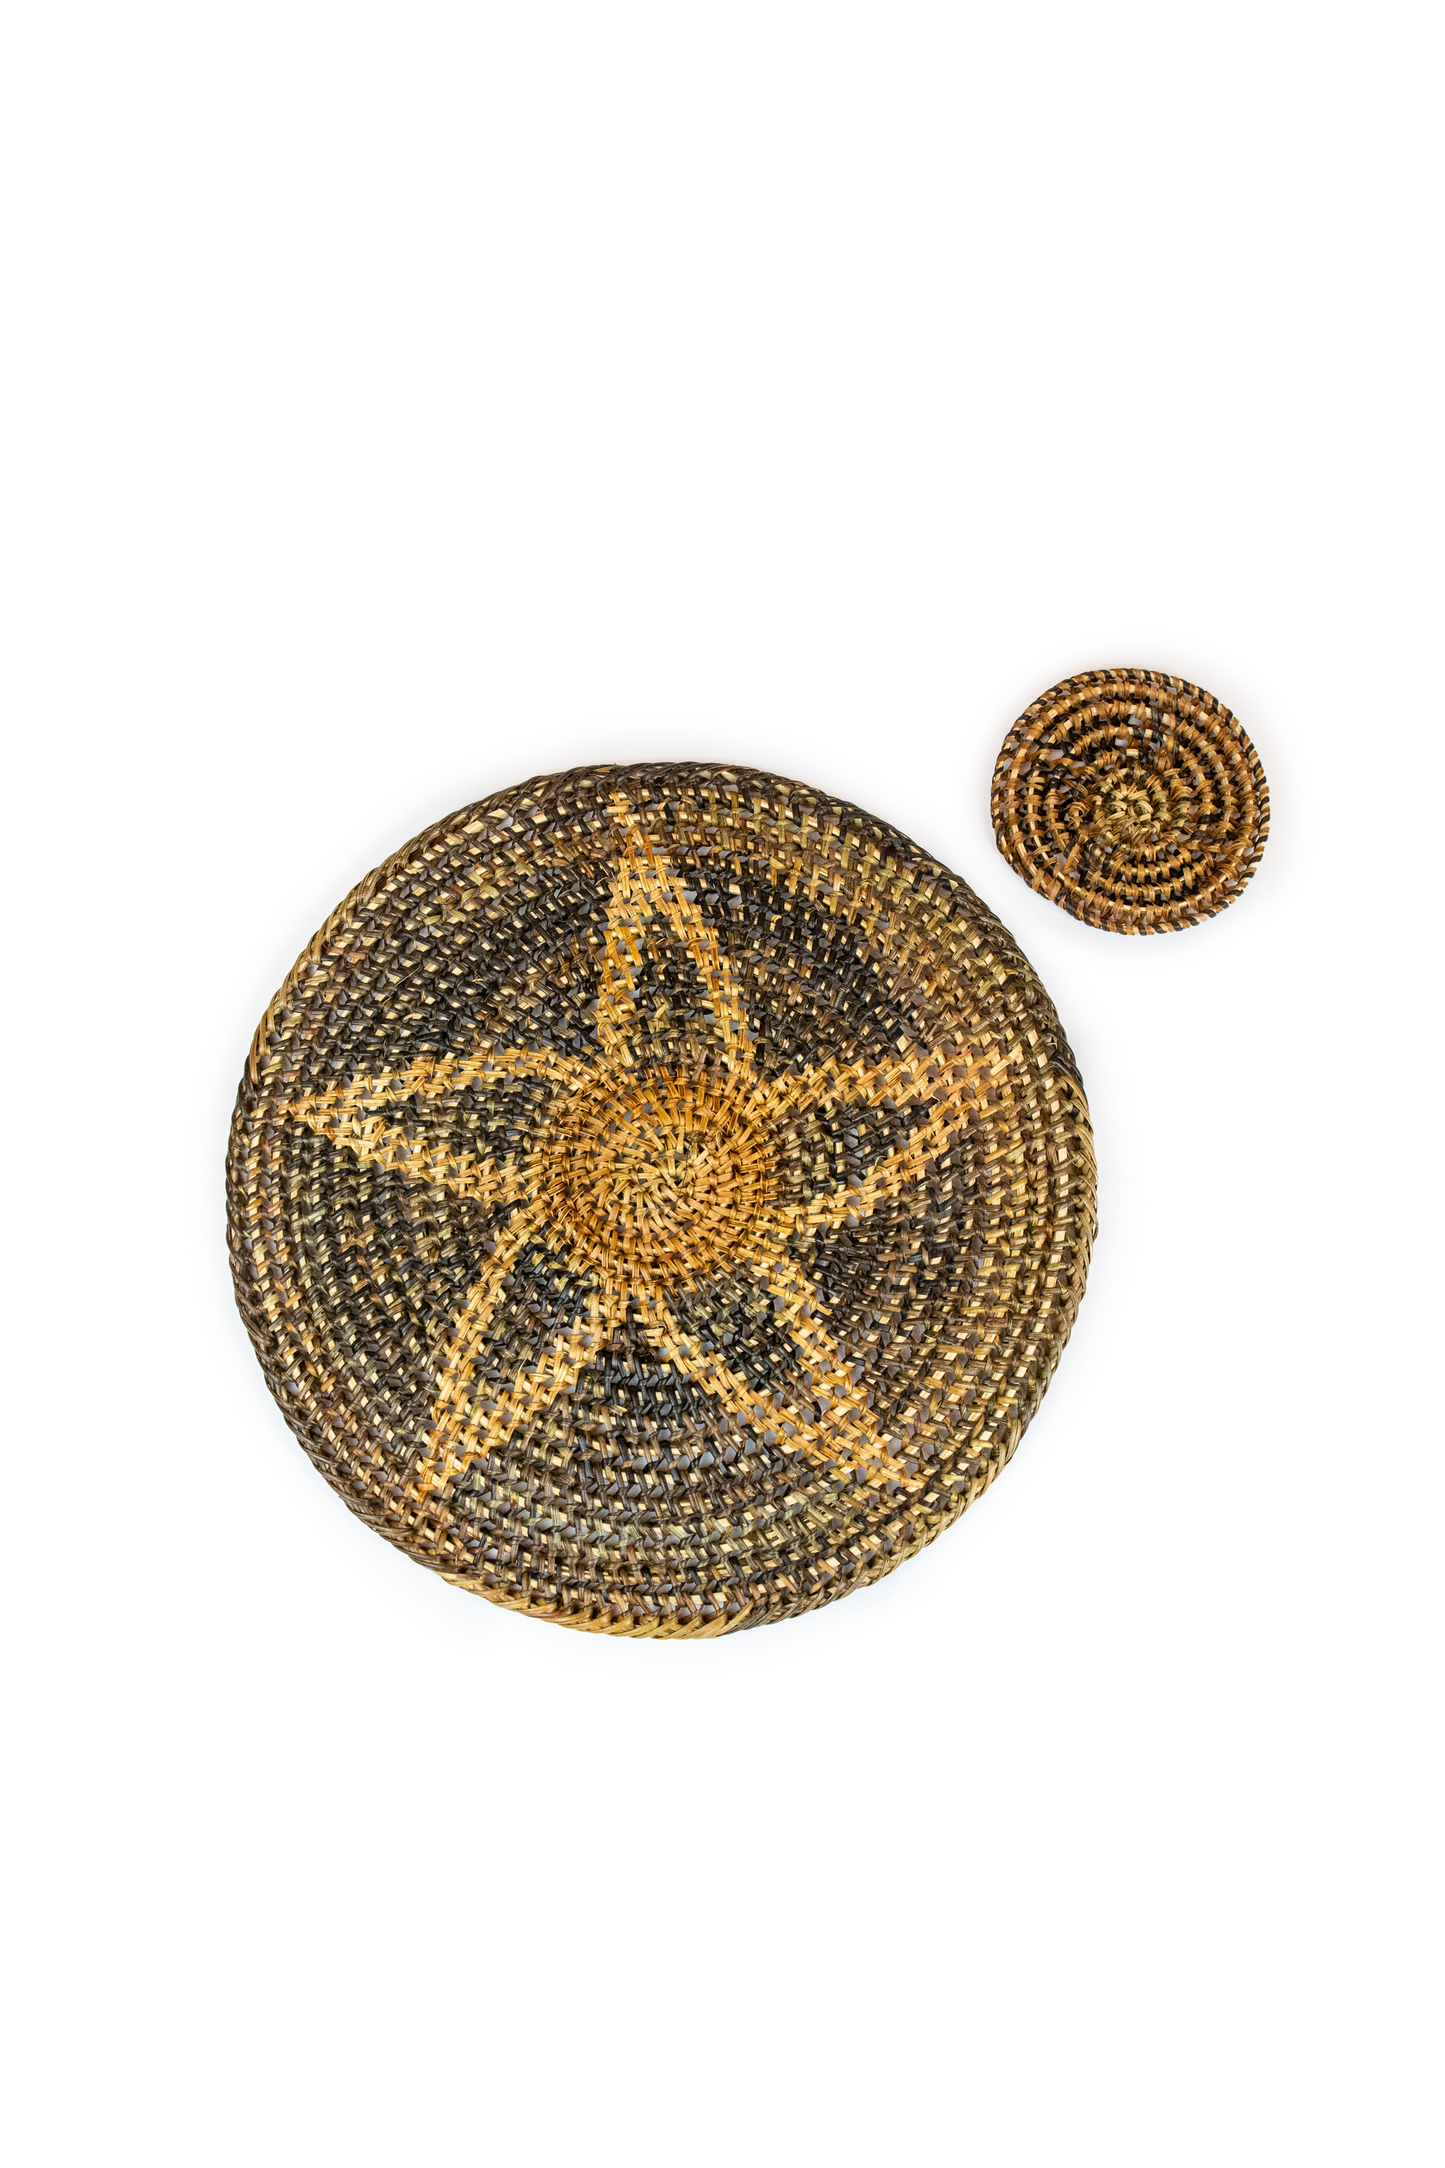 Handwoven Natural Coasters